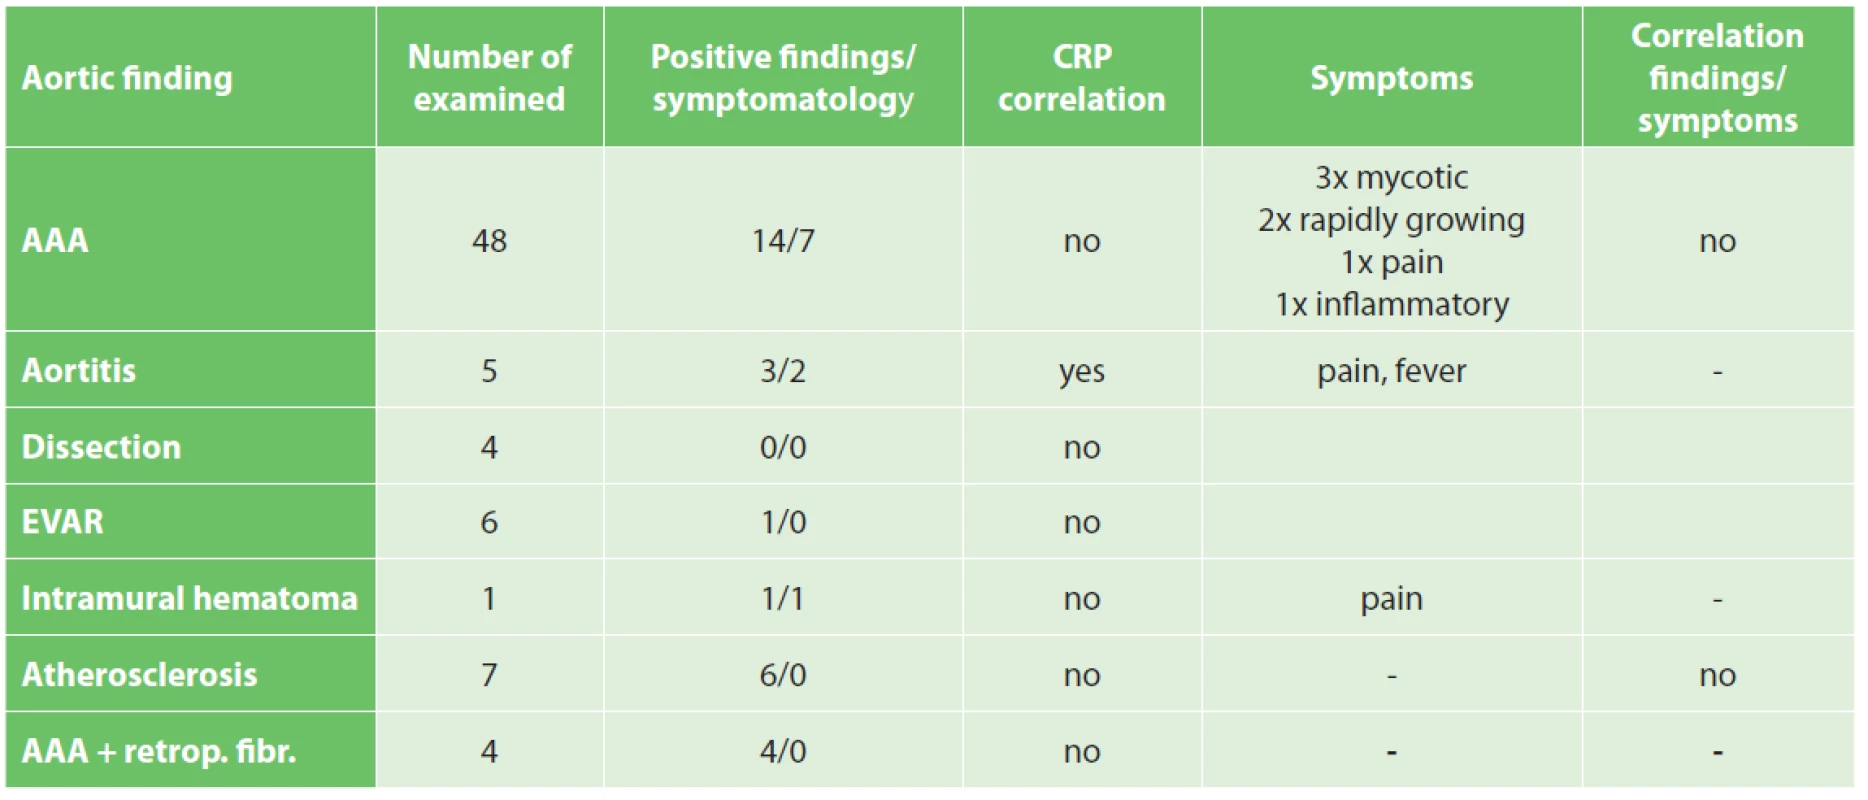 Correlation of positive findings based on hybrid techniques with patients’ symptoms and CRP